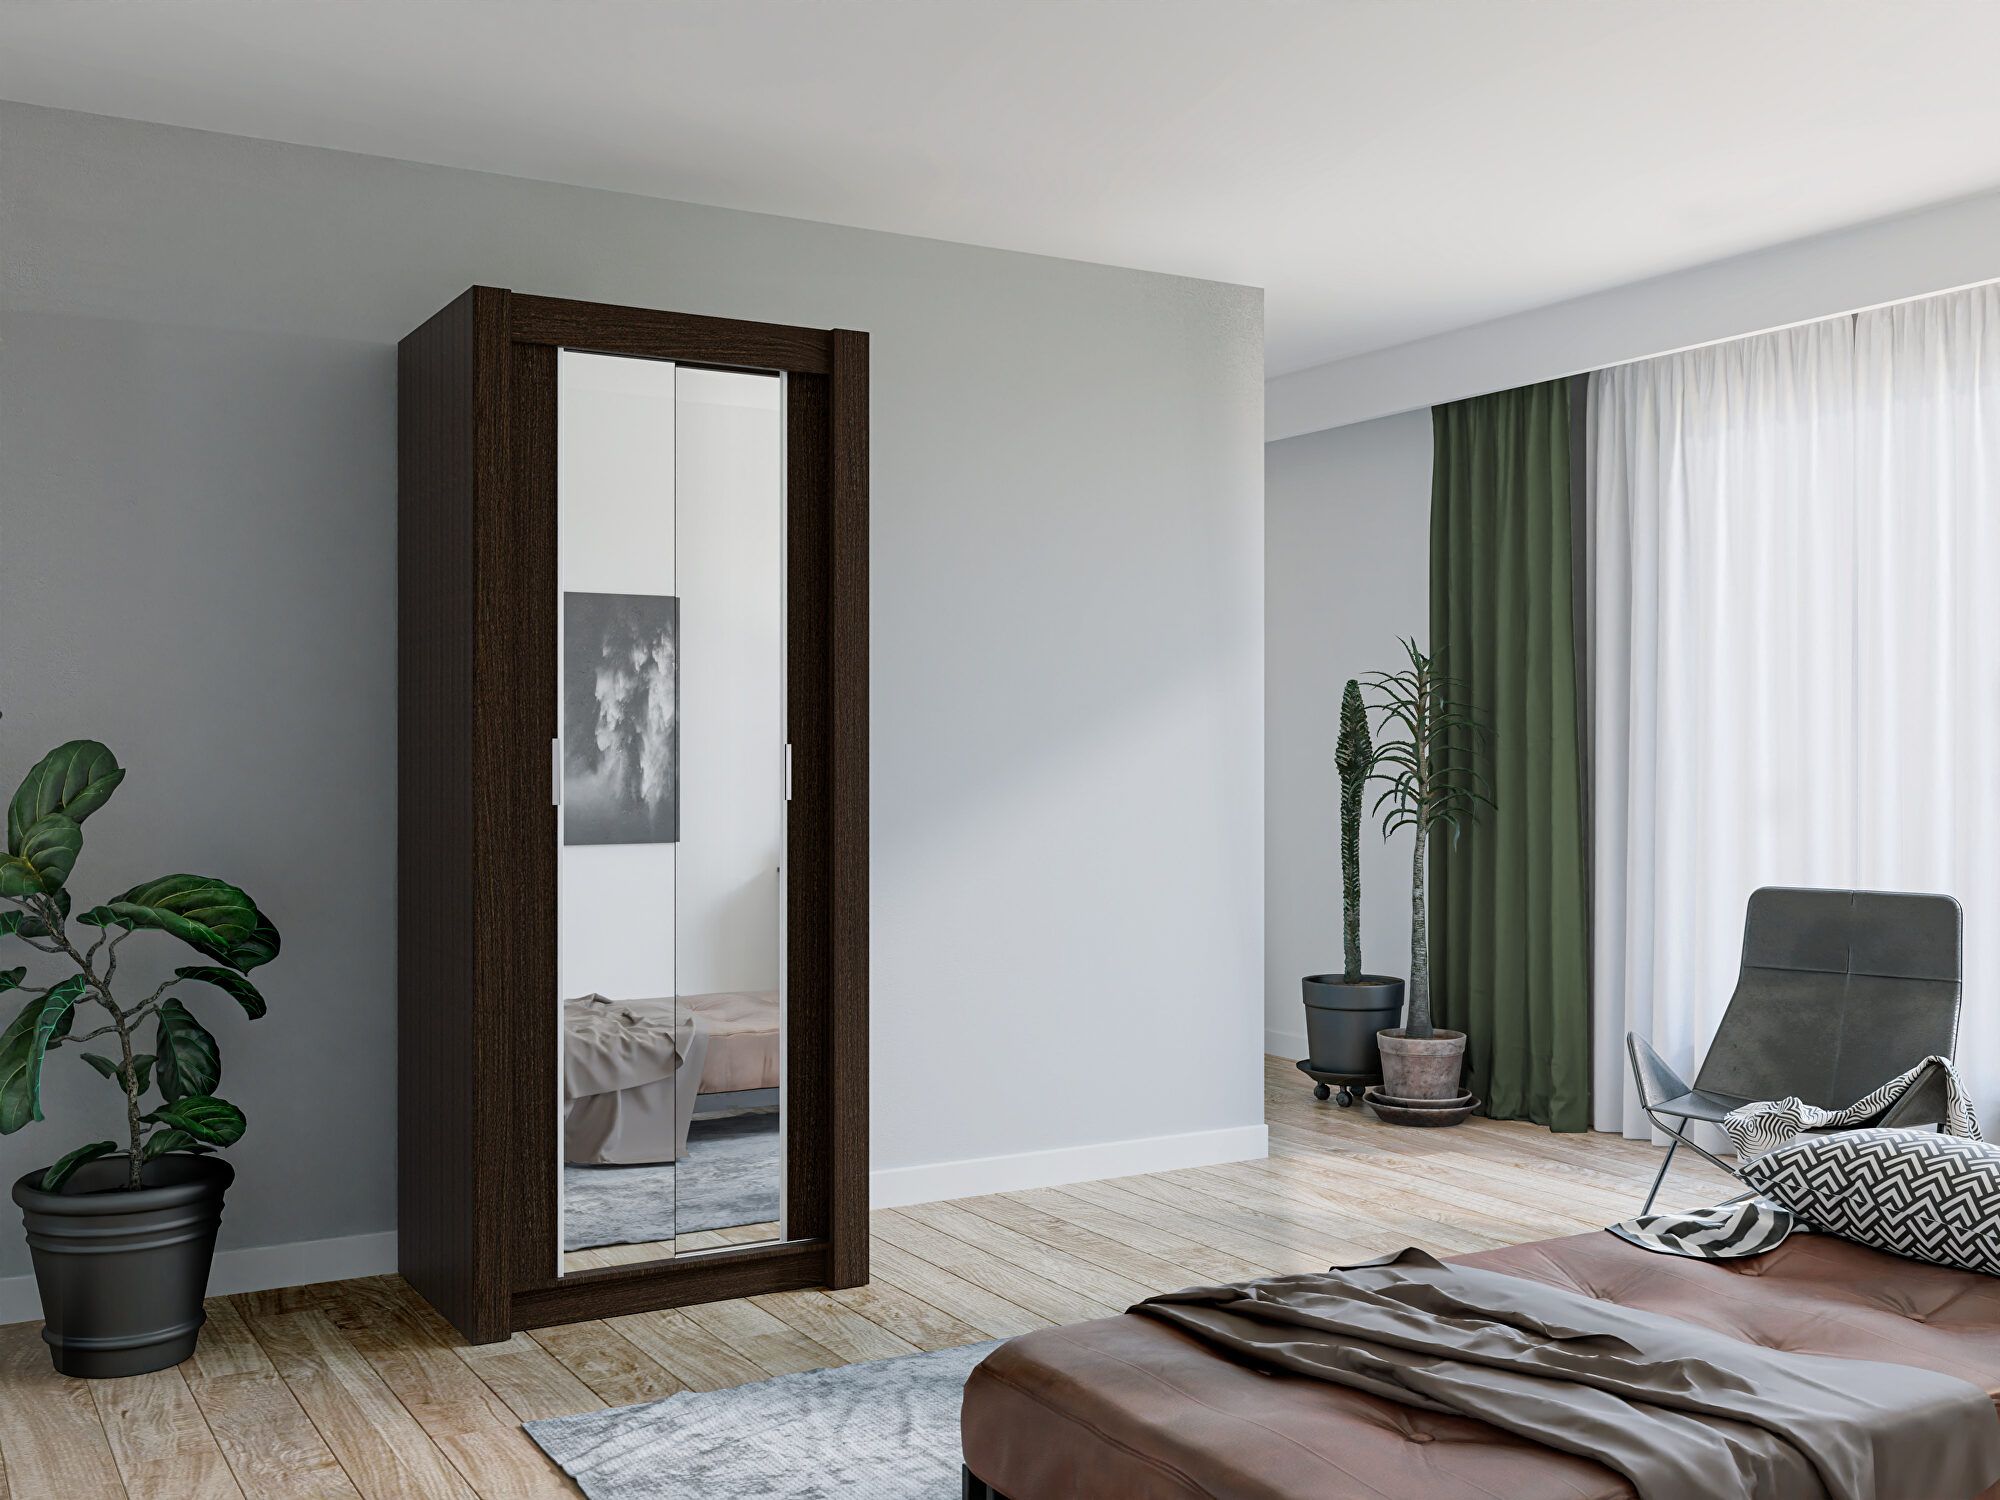 Skyler Design Chico 36 Wenge Wardrobe Chico36 | Comfyco For Single Wardrobes With Mirror (View 13 of 15)